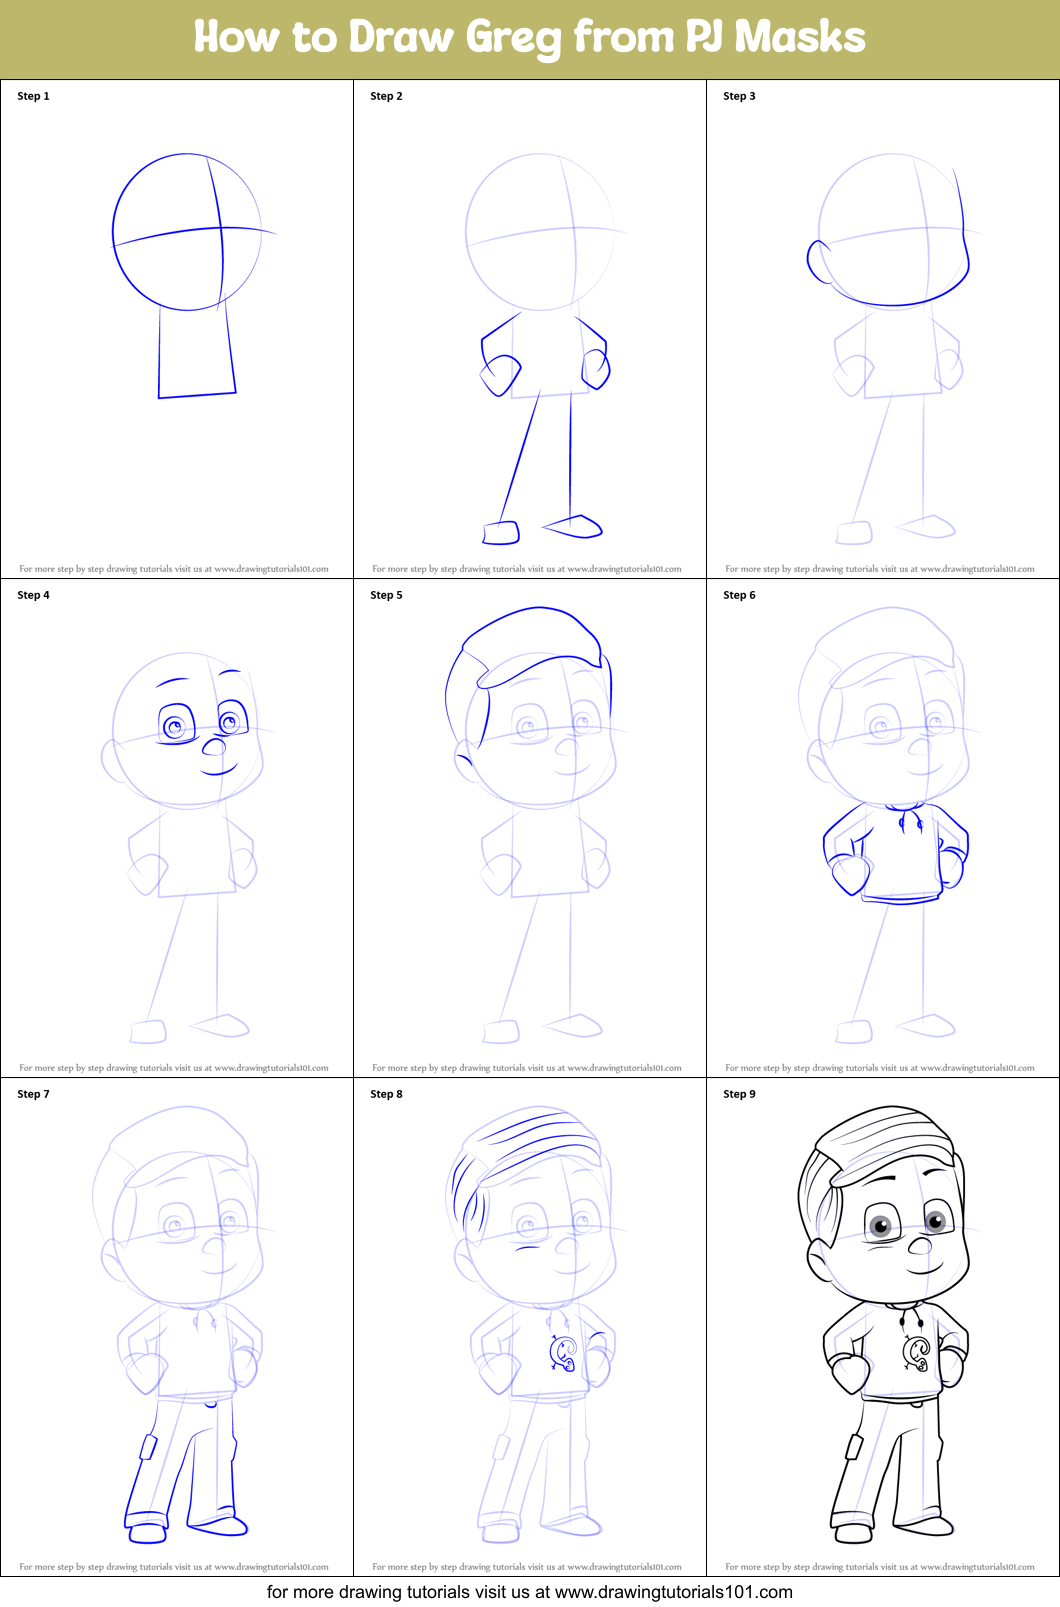 How to Draw Greg from PJ Masks printable step by step drawing sheet